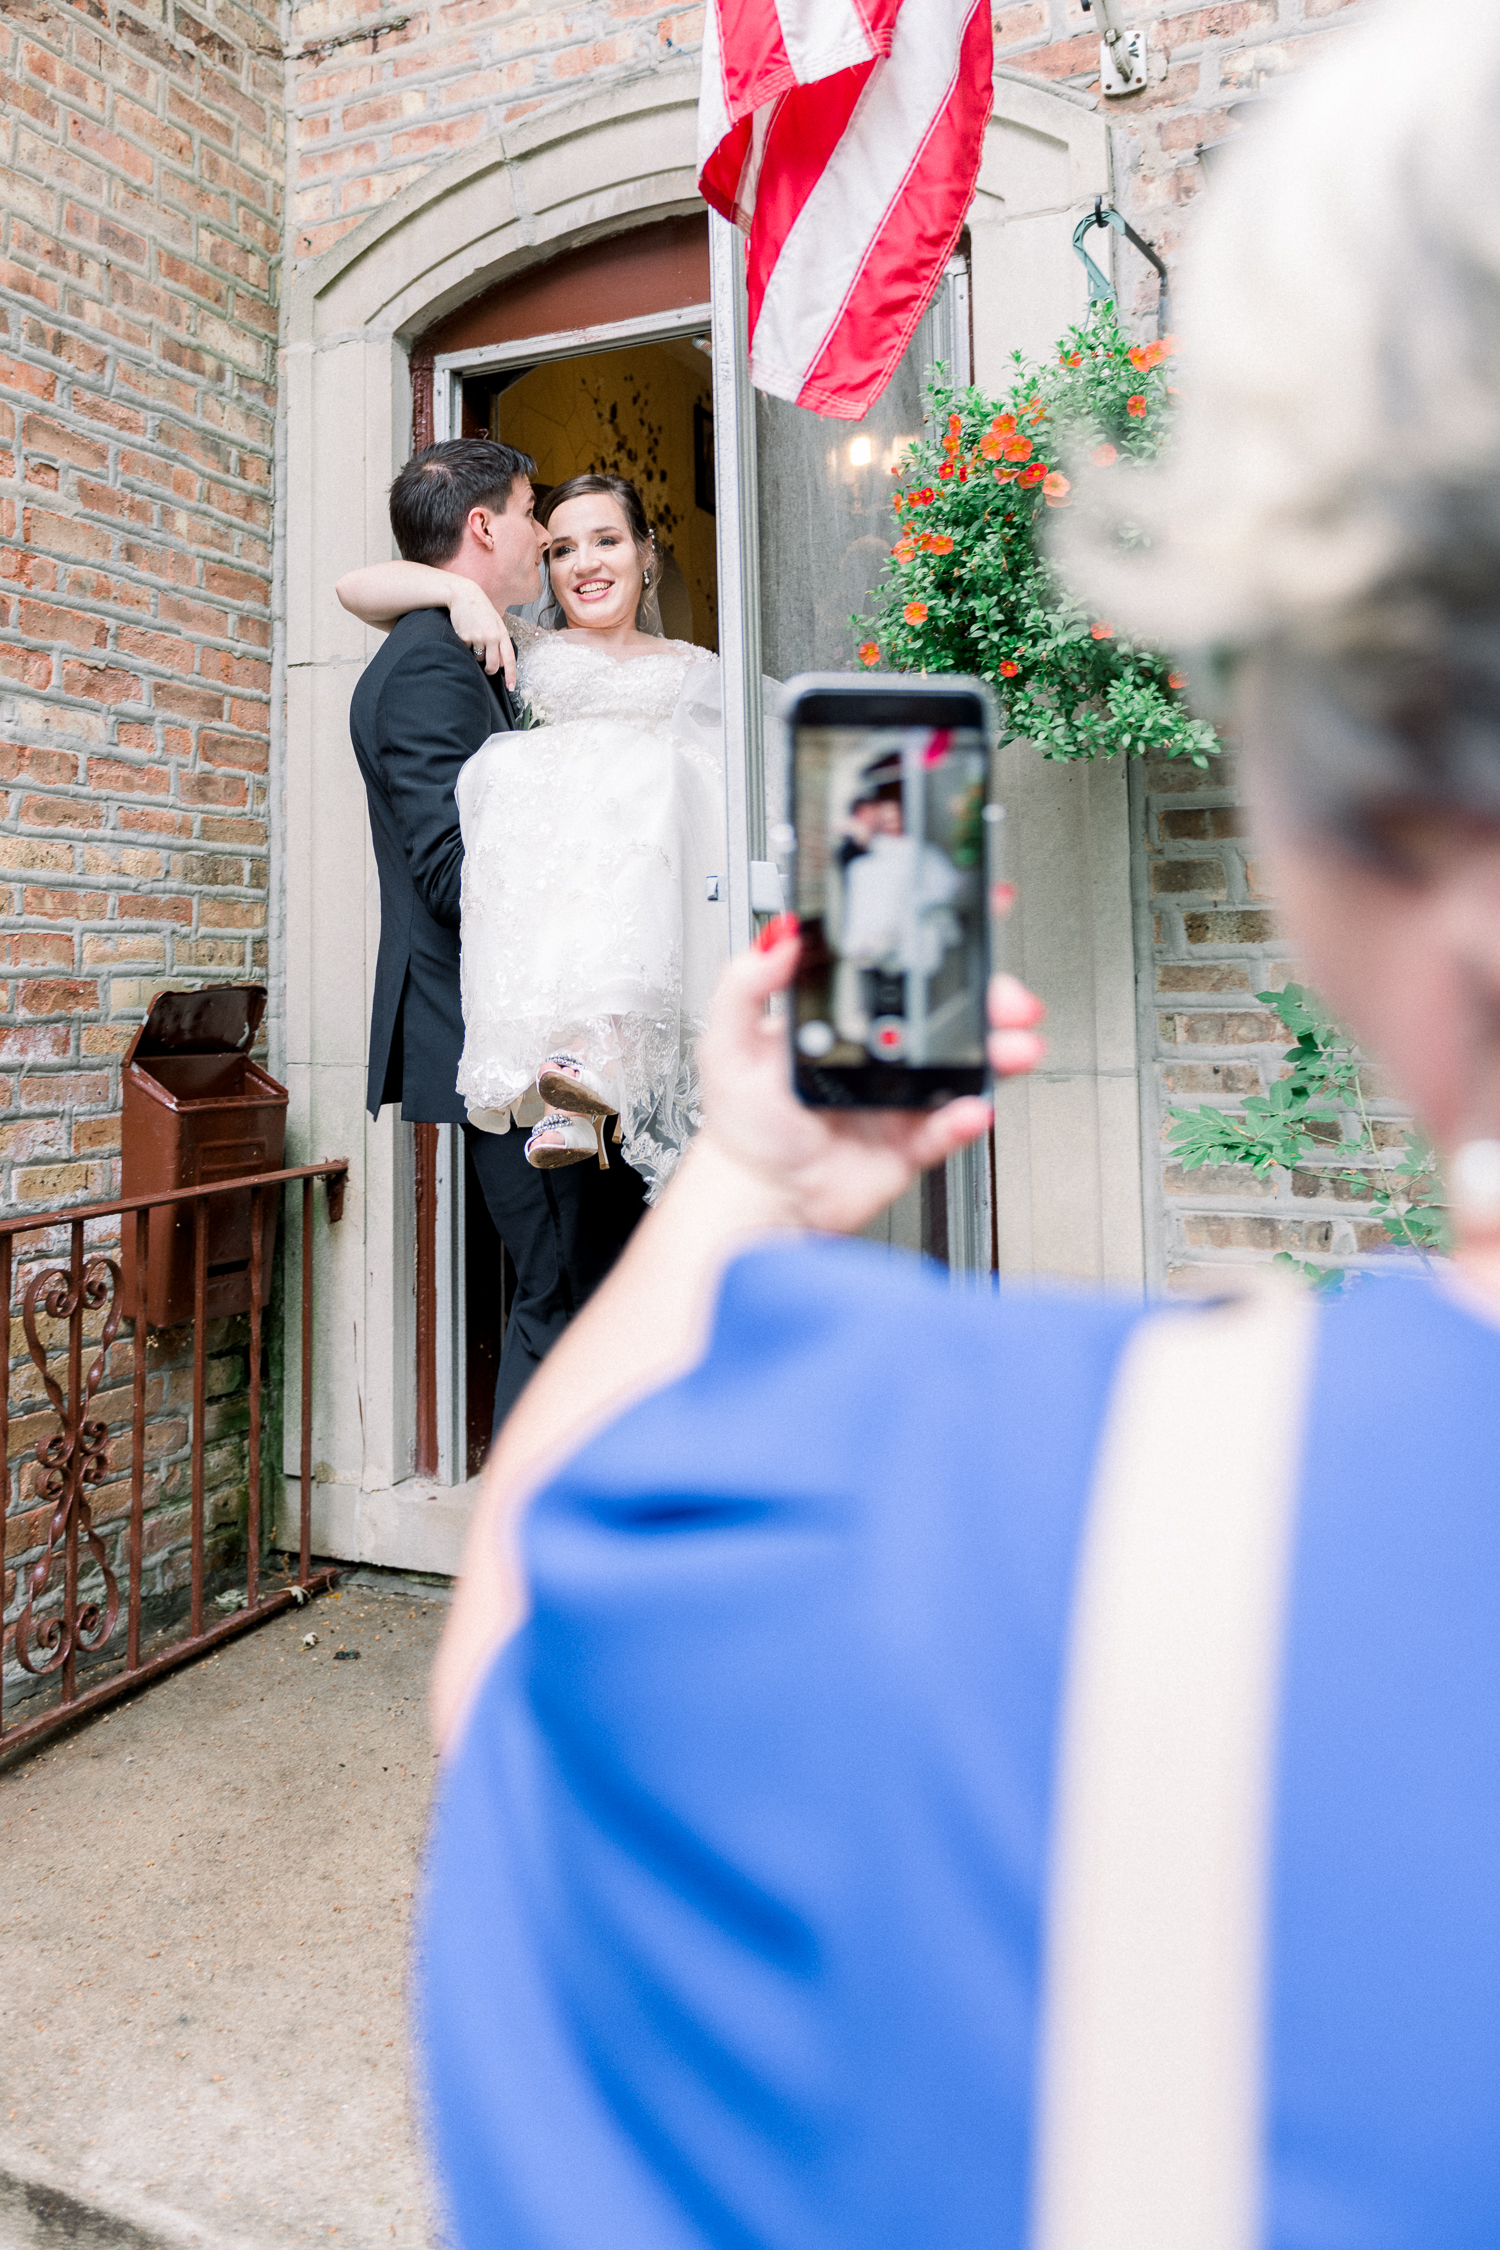 Groom carries bride inside her house and a lady with a cellphone is filming them